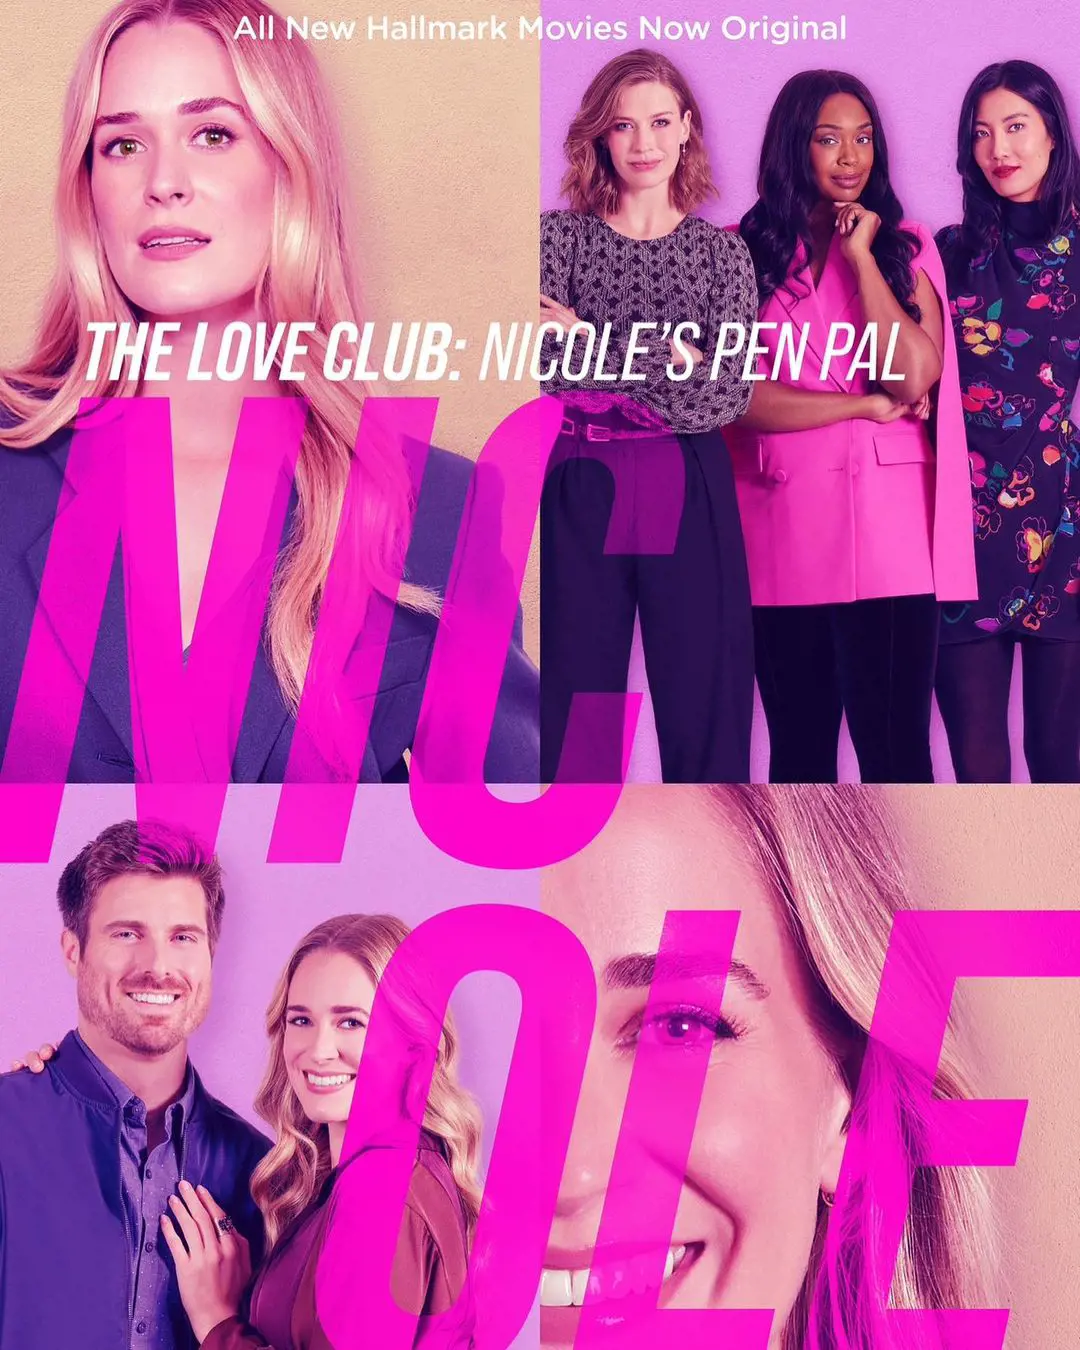 In the movie series The Love Club: Nicole's Pen Pal, Nicole is played by Brittany Bristrow 